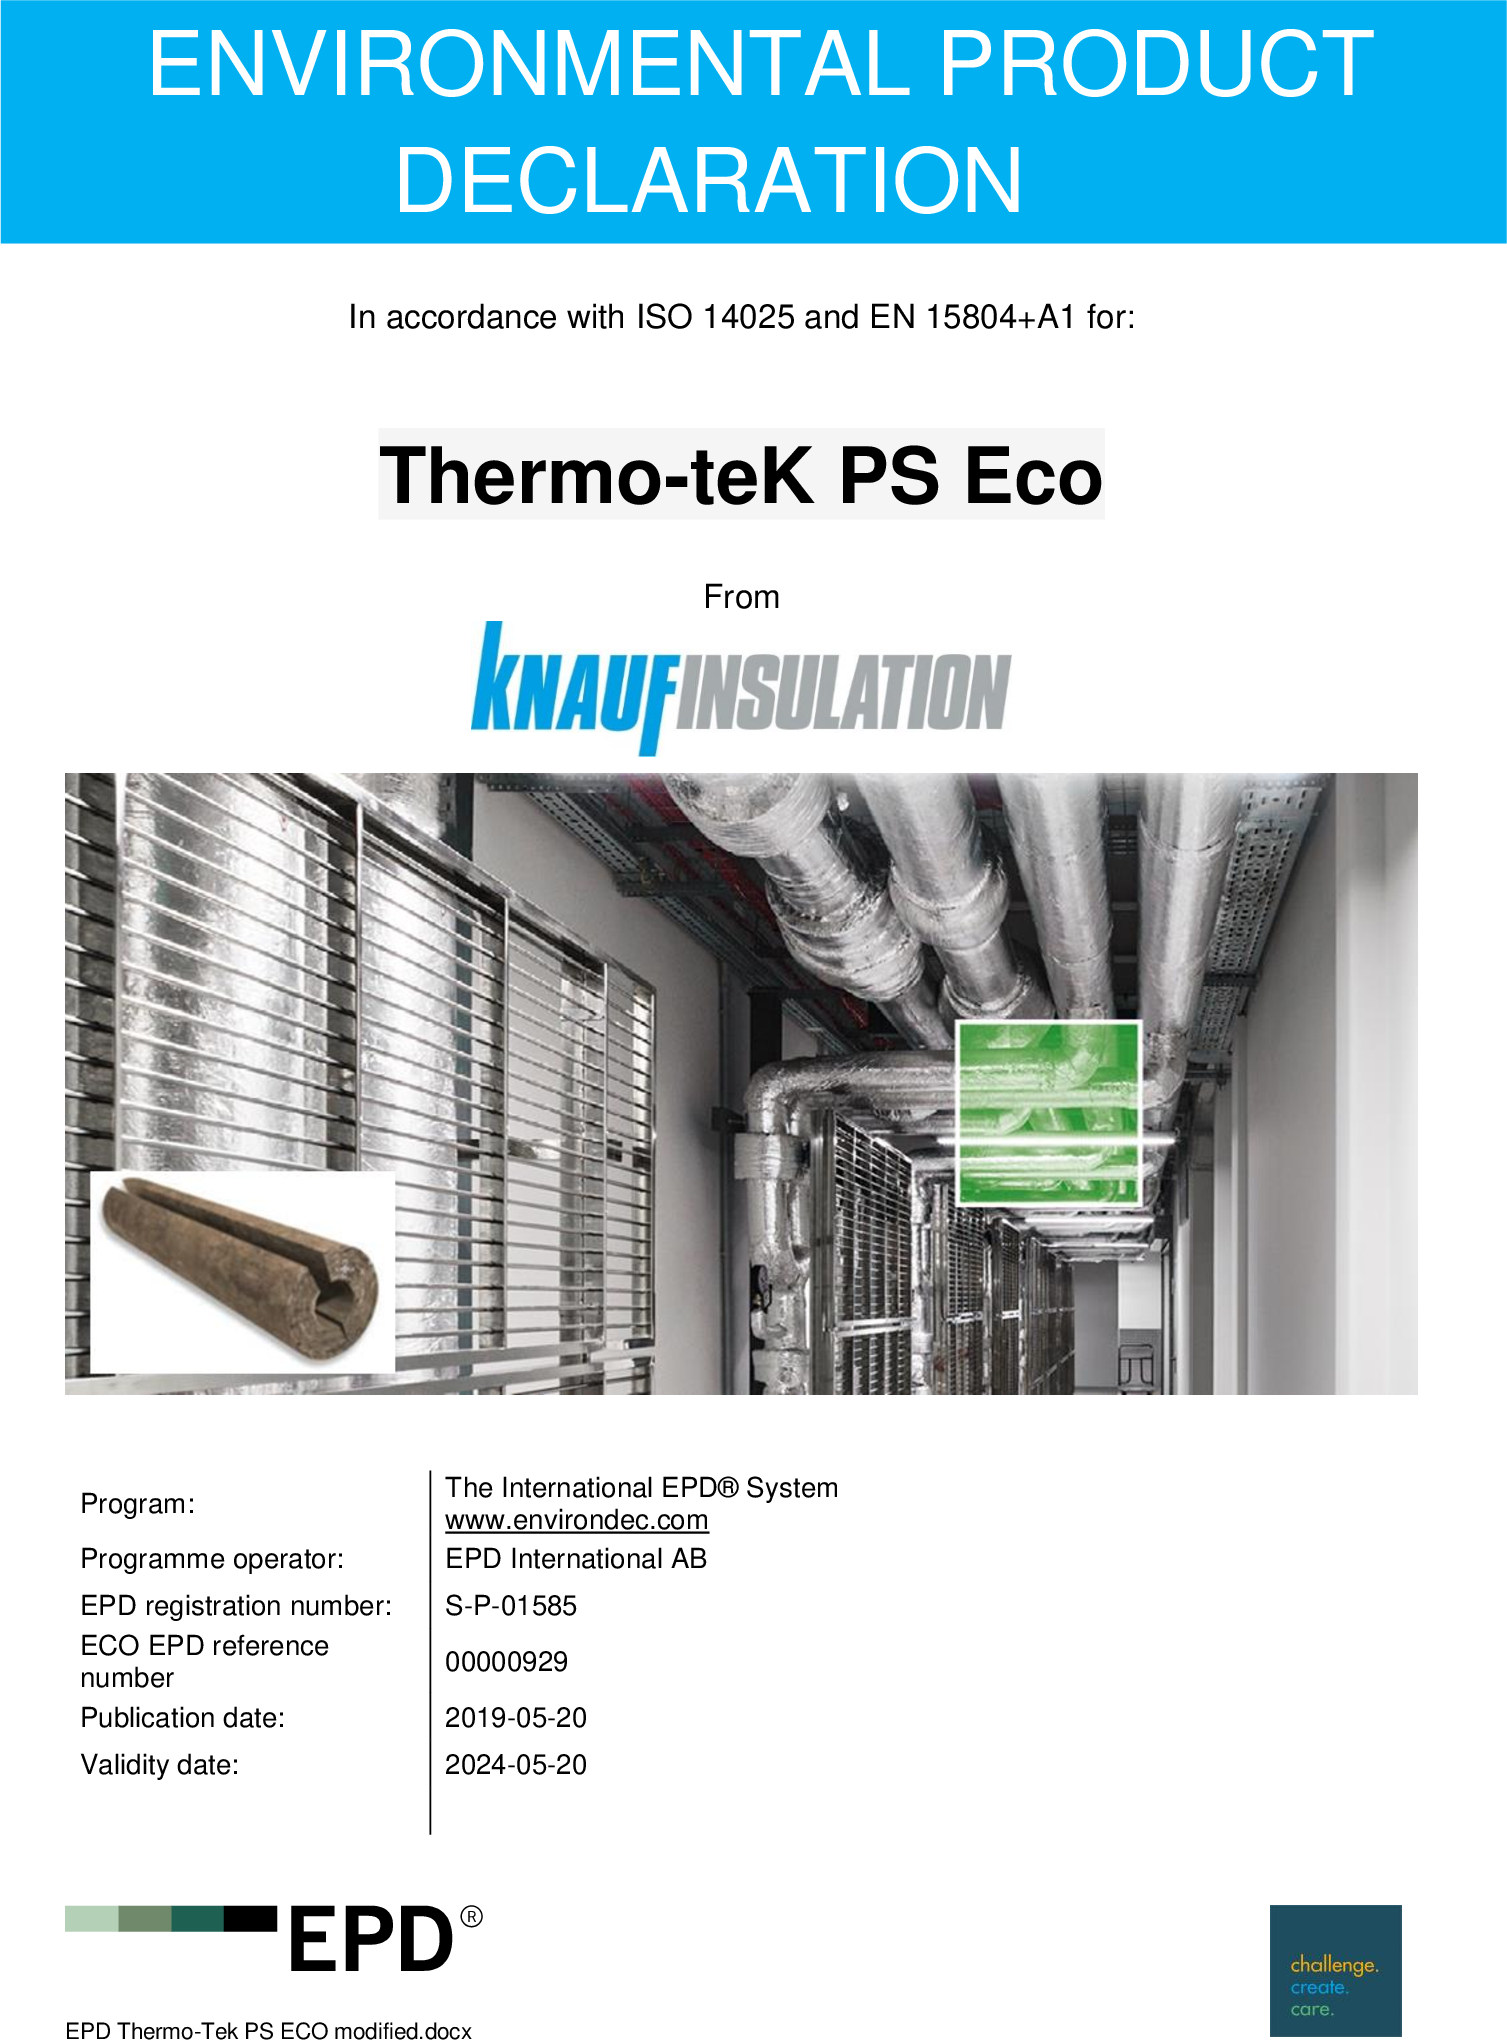 Thermo-teK PS Eco